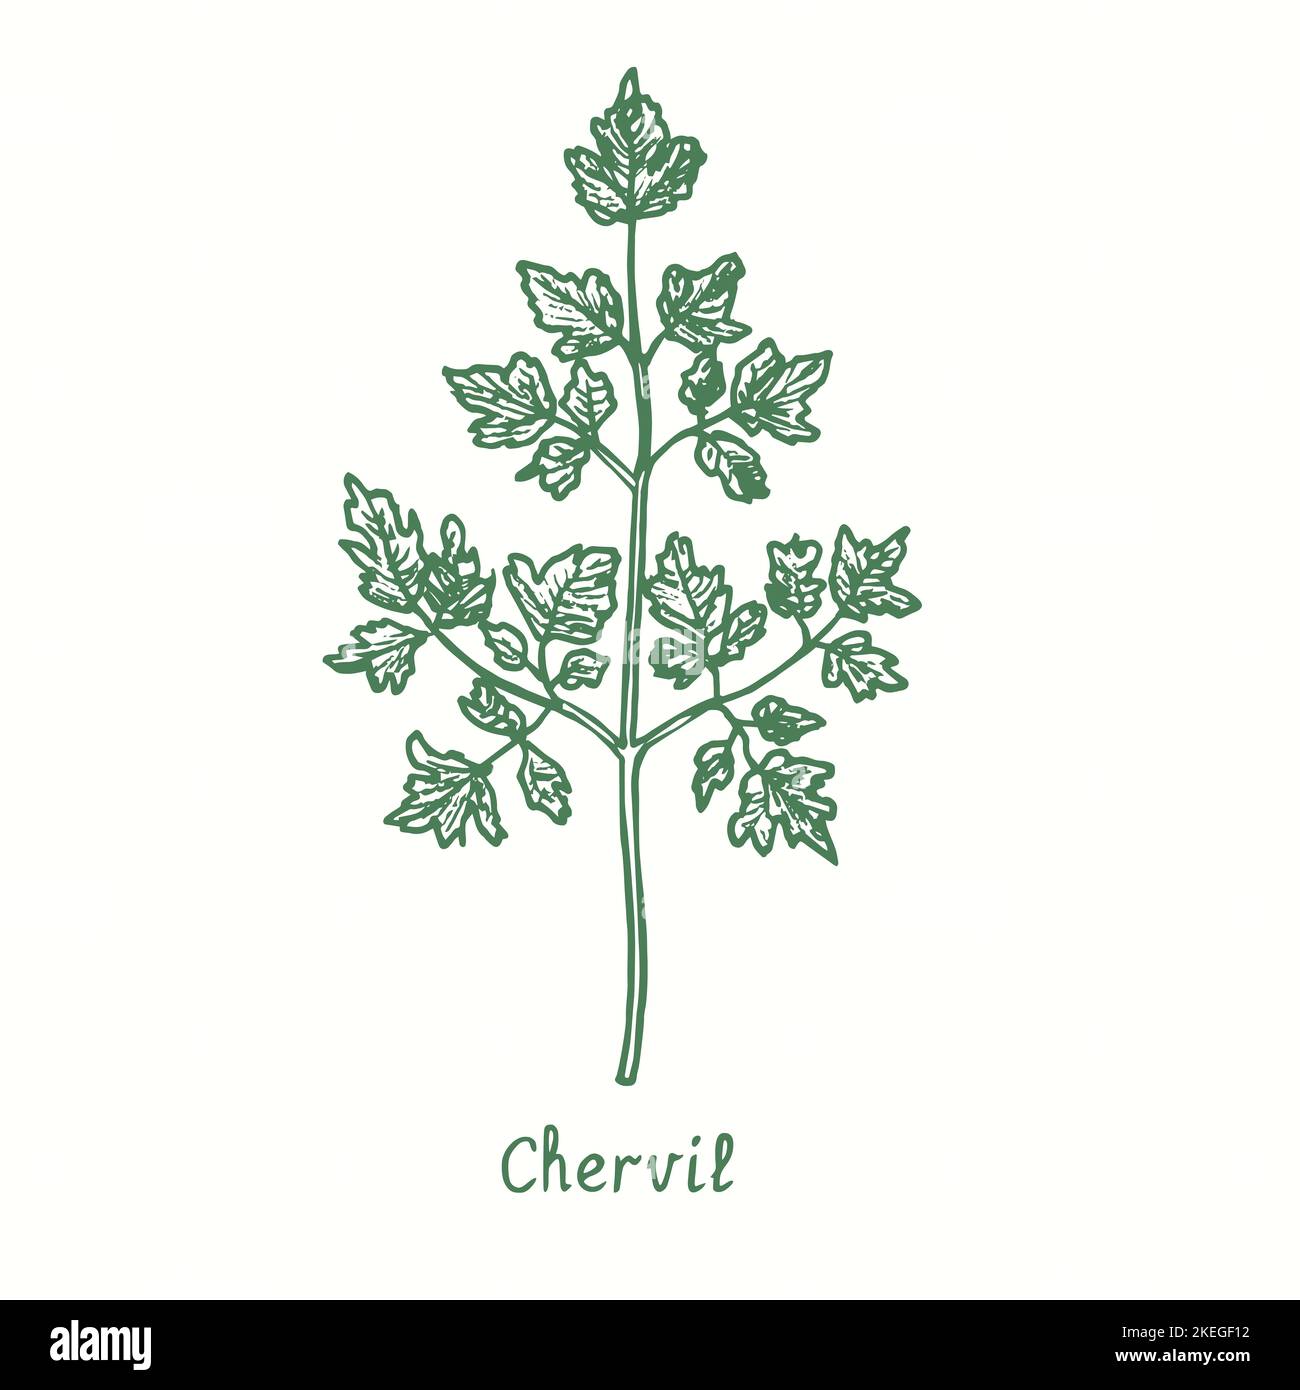 Chervil green twig.  Ink black and white doodle drawing in woodcut style Stock Photo